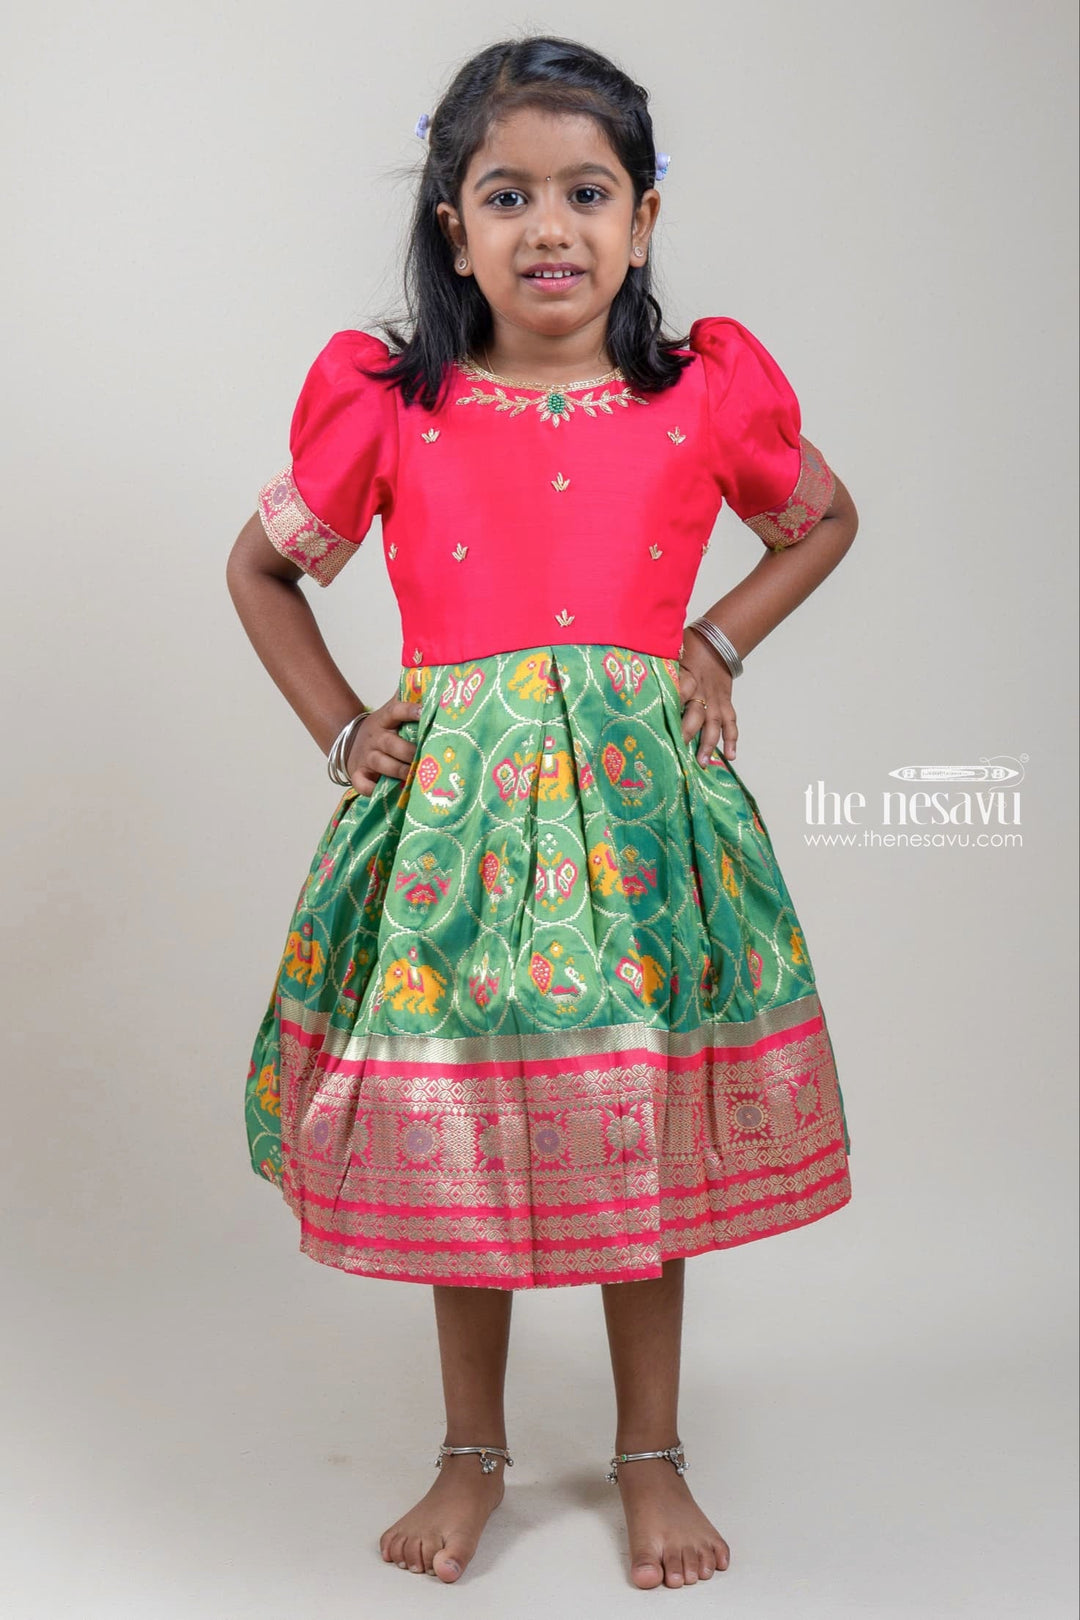 The Nesavu Silk Party Frock Traditional Red And Green Elephant Designer Semi-Silk Frock For Girls Nesavu 14 (6M) / Red / Silk Blend SF568-14 Latest Silk Gown For Girls | Premium Silk Frock | The Nesavu